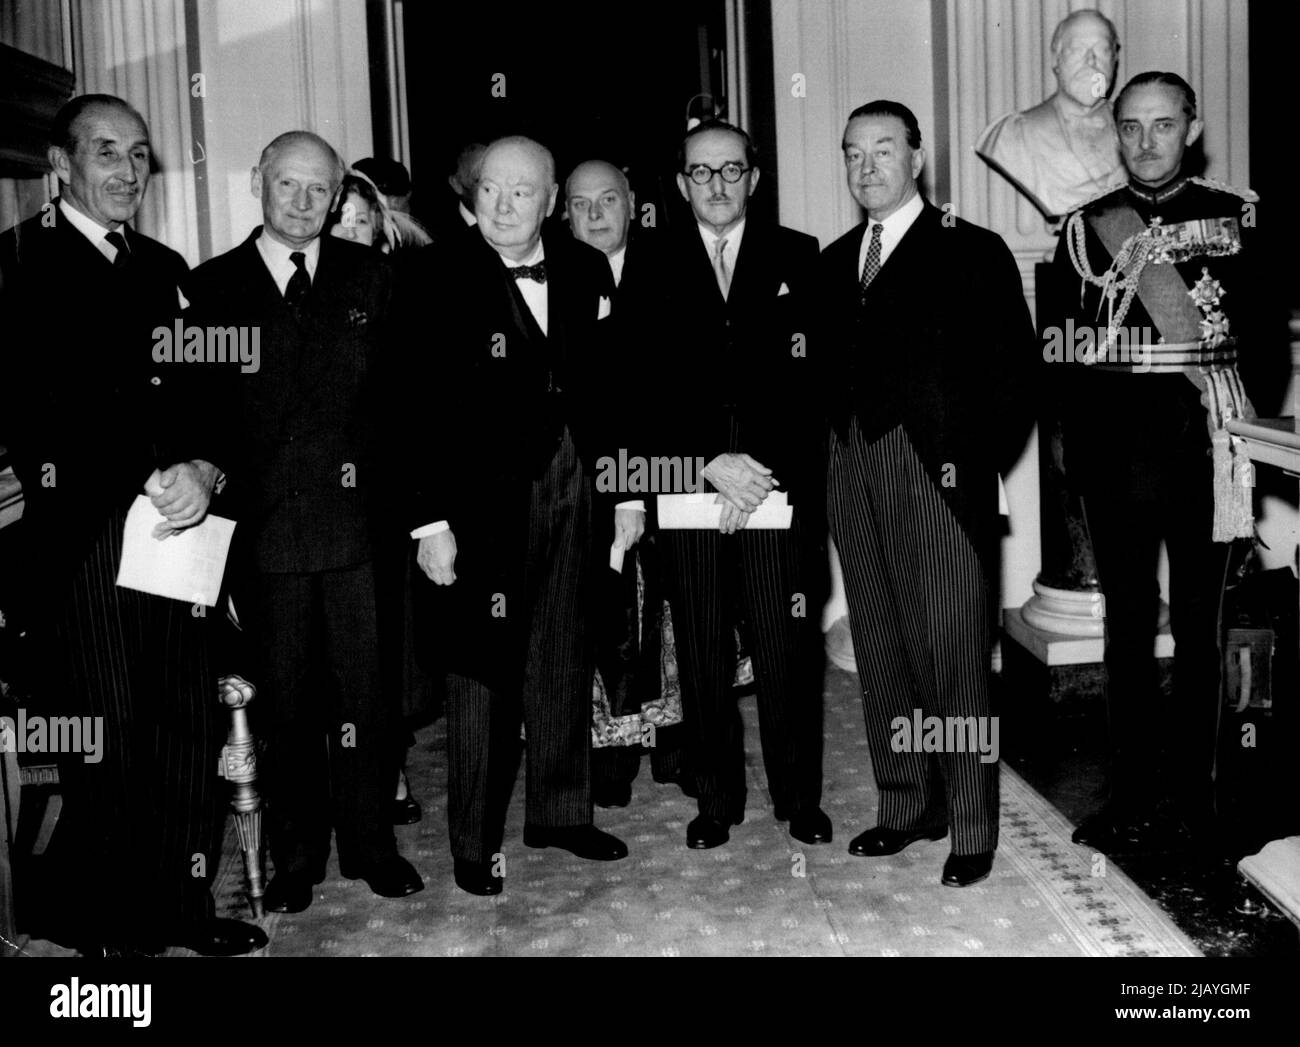 Sir Winston Receives Ulster Freedoms at the Mansion House -- Sir Winston Churchill, at the Mansion House, London, to receive the Freedoms of Belfast and Londonderry to-day (Friday), is pictured with - left to right - Lord Brookeborough, Prime Minister of Northern Ireland; Field-Marshal, Viscount Montgomery; Field-Marshal, Viscount Alawbrooke; Field-Marshal, Earl Alexander; and General Sir Gerald Temper, Chief of the Imperial General Staff. December 16, 1955. (Photo by Reuterphoto). Stock Photo